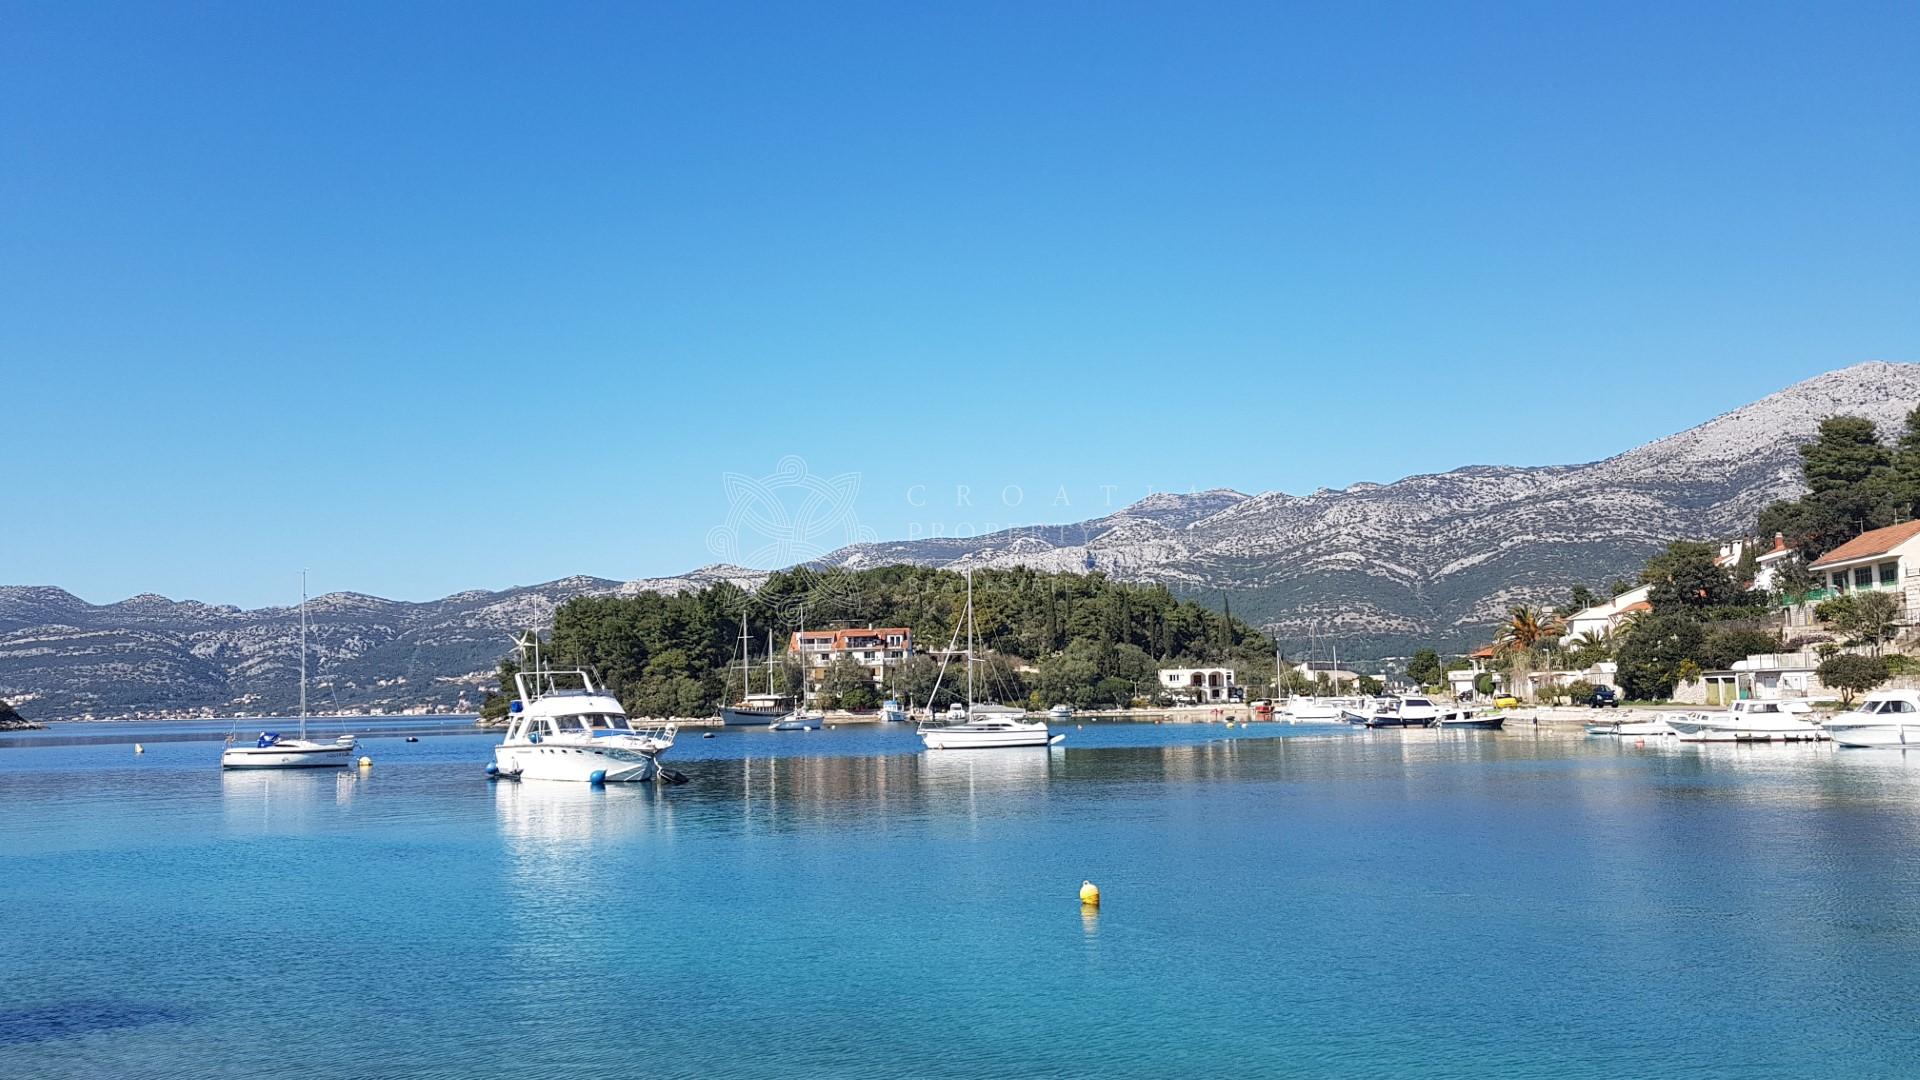 Croatia Korcula Town area waterfront cottage for sale